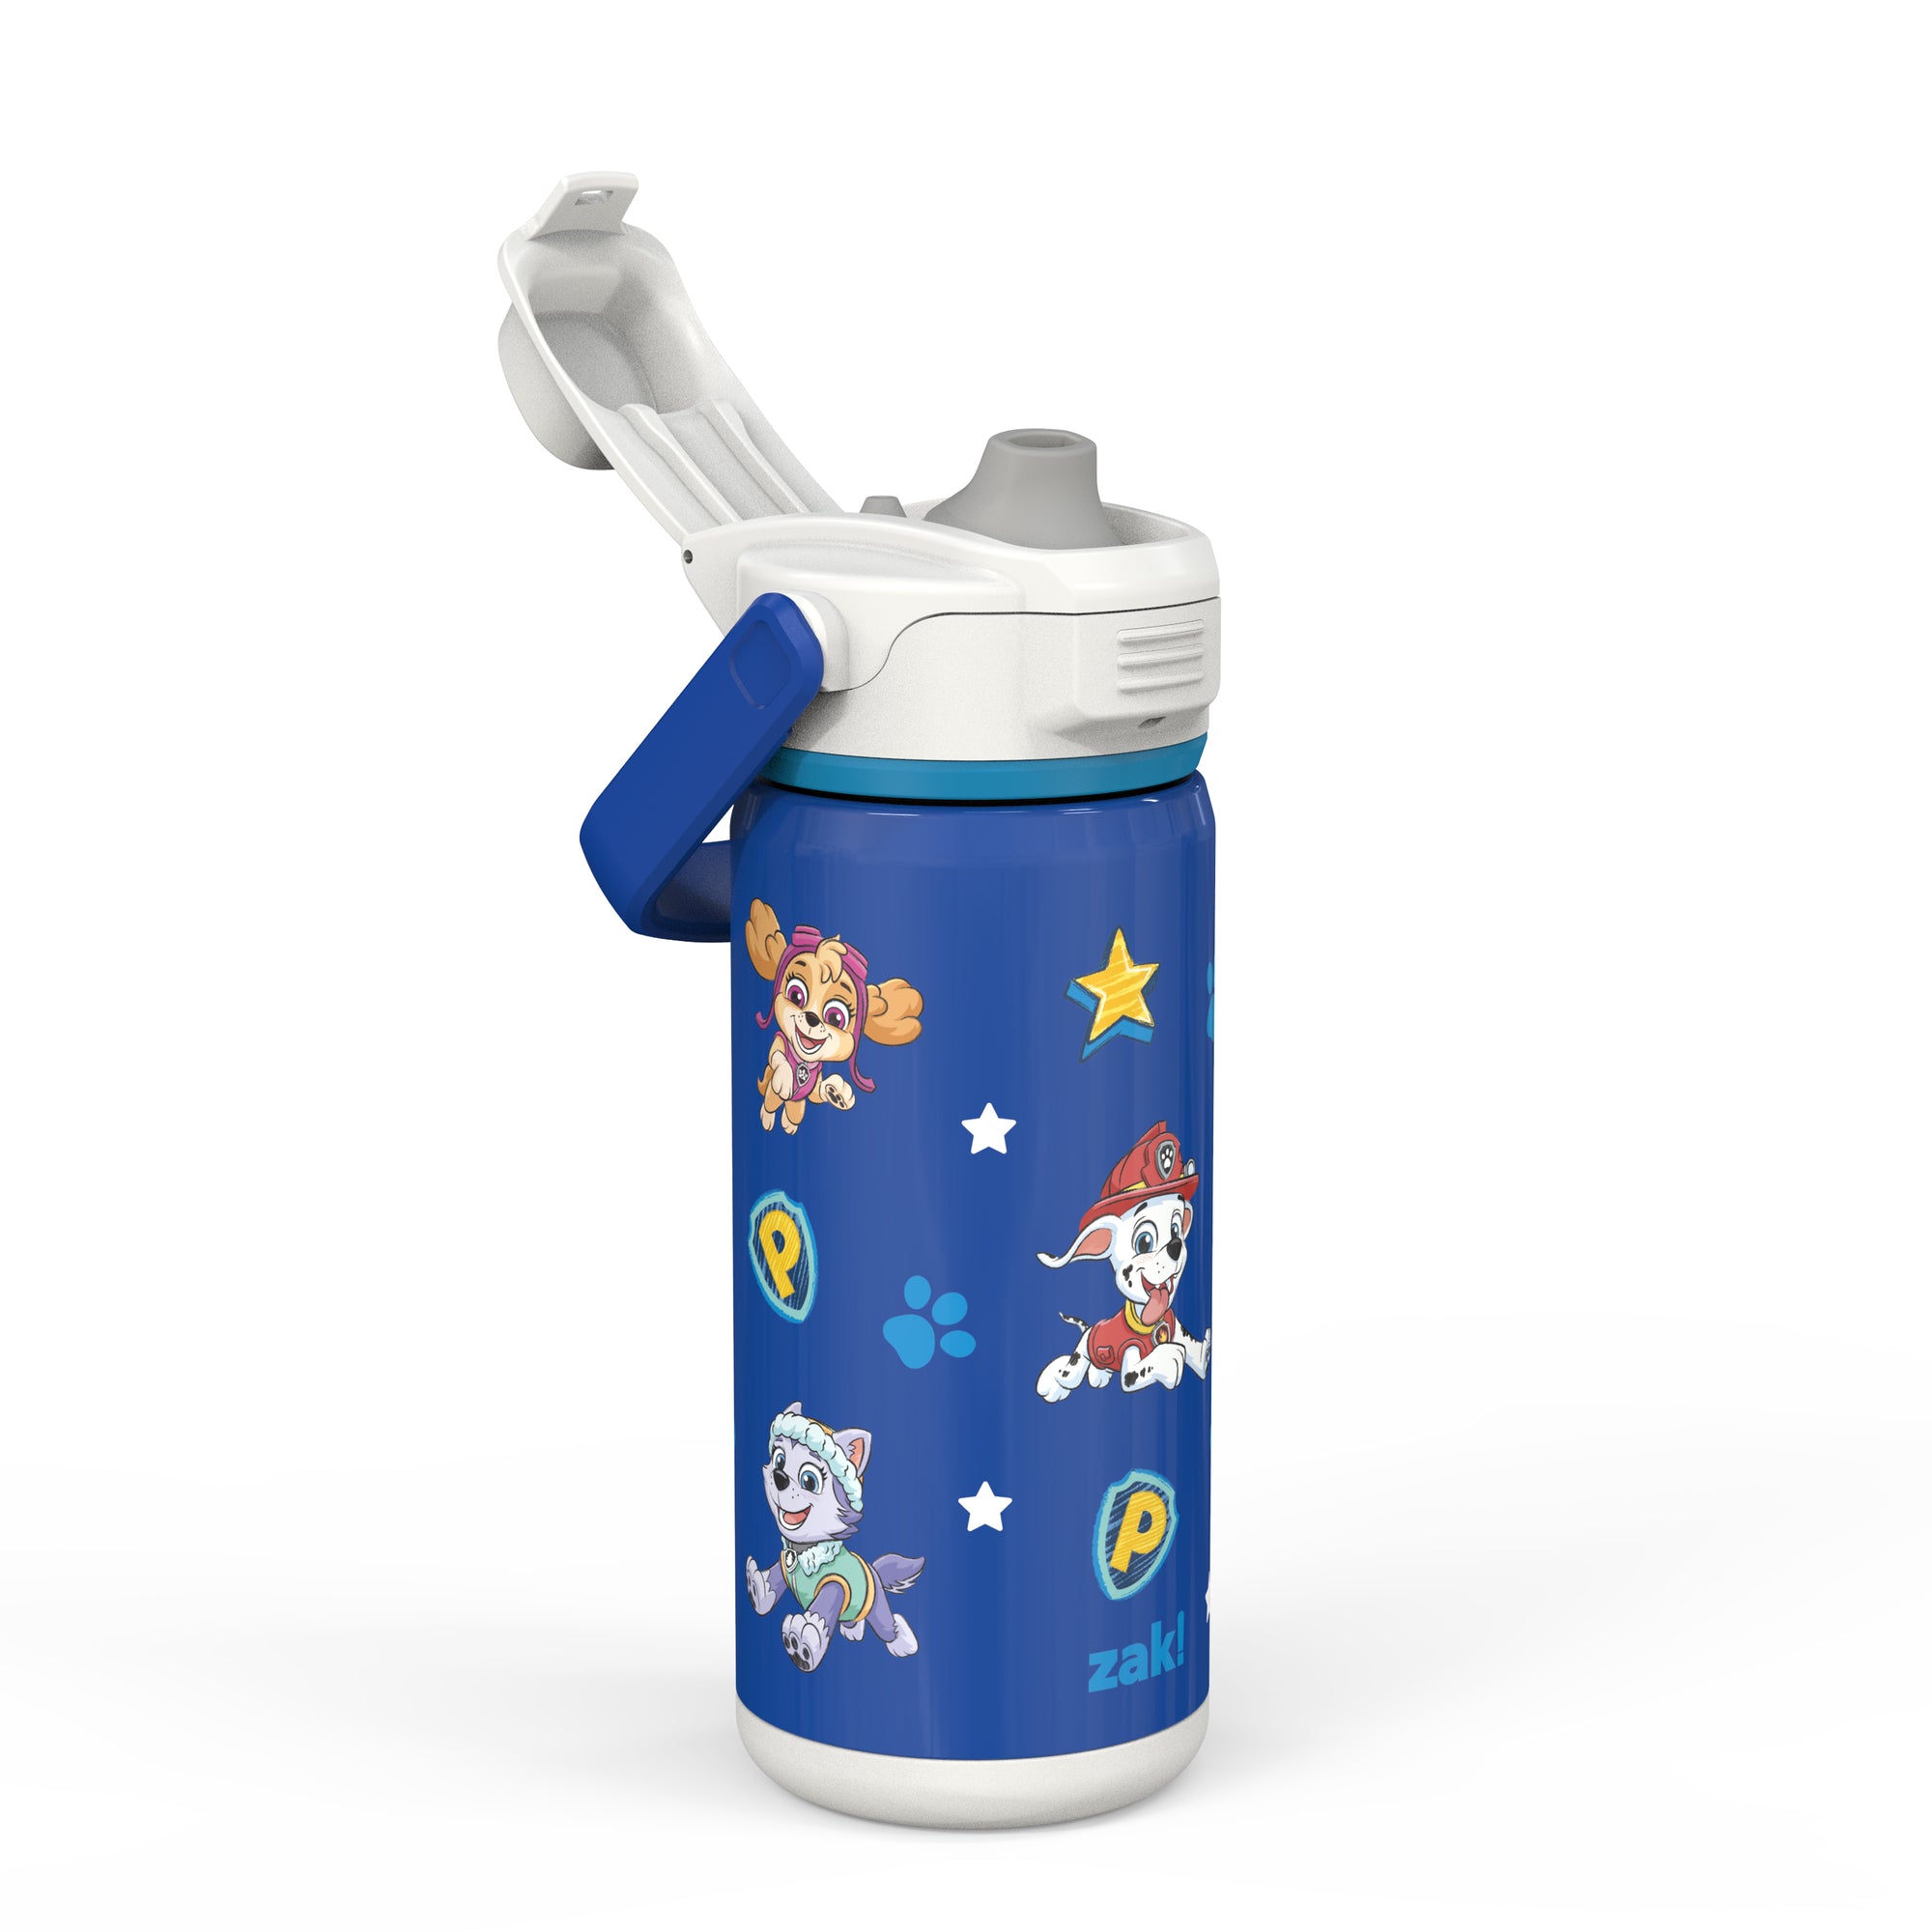 PAW Patrol Beacon Stainless Steel Insulated Kids Water Bottle with Covered Spout, 14 Ounces